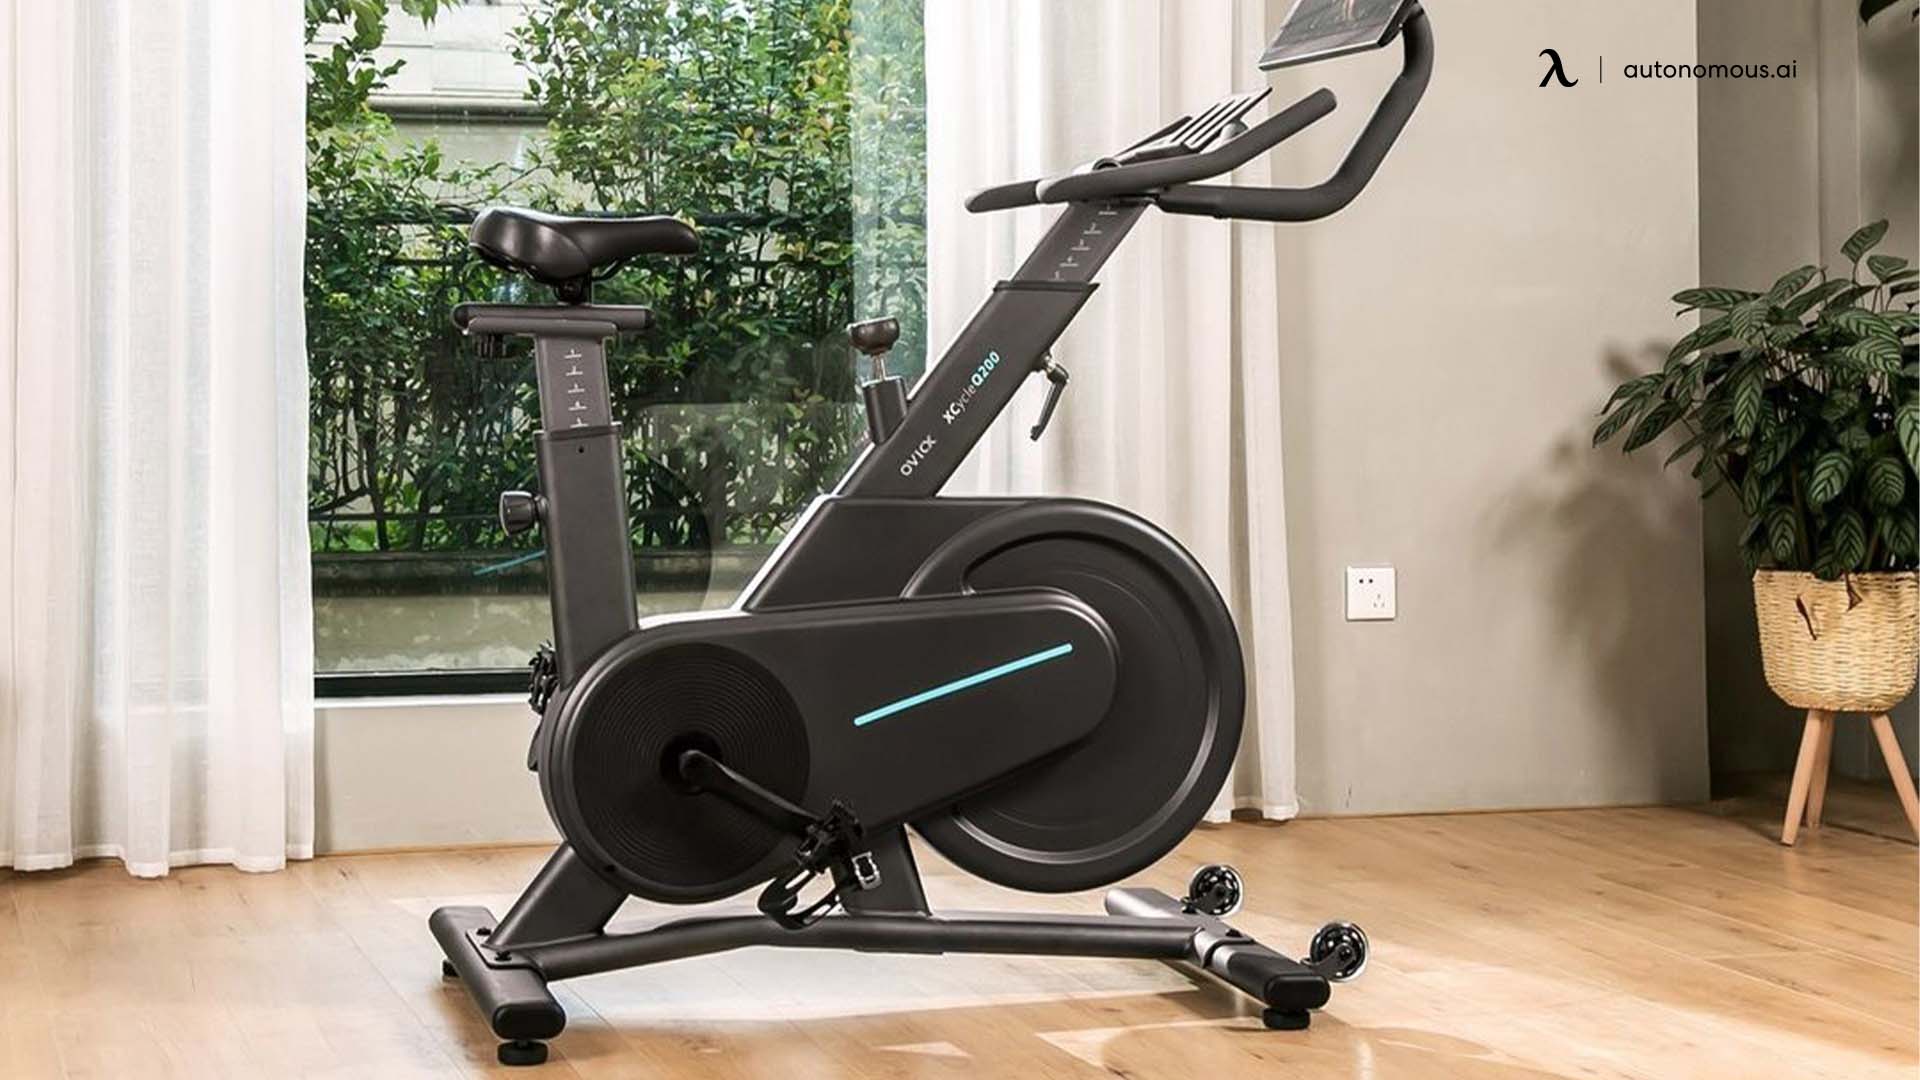 Top 4 Exercise Bikes on Sale for the 4th of July